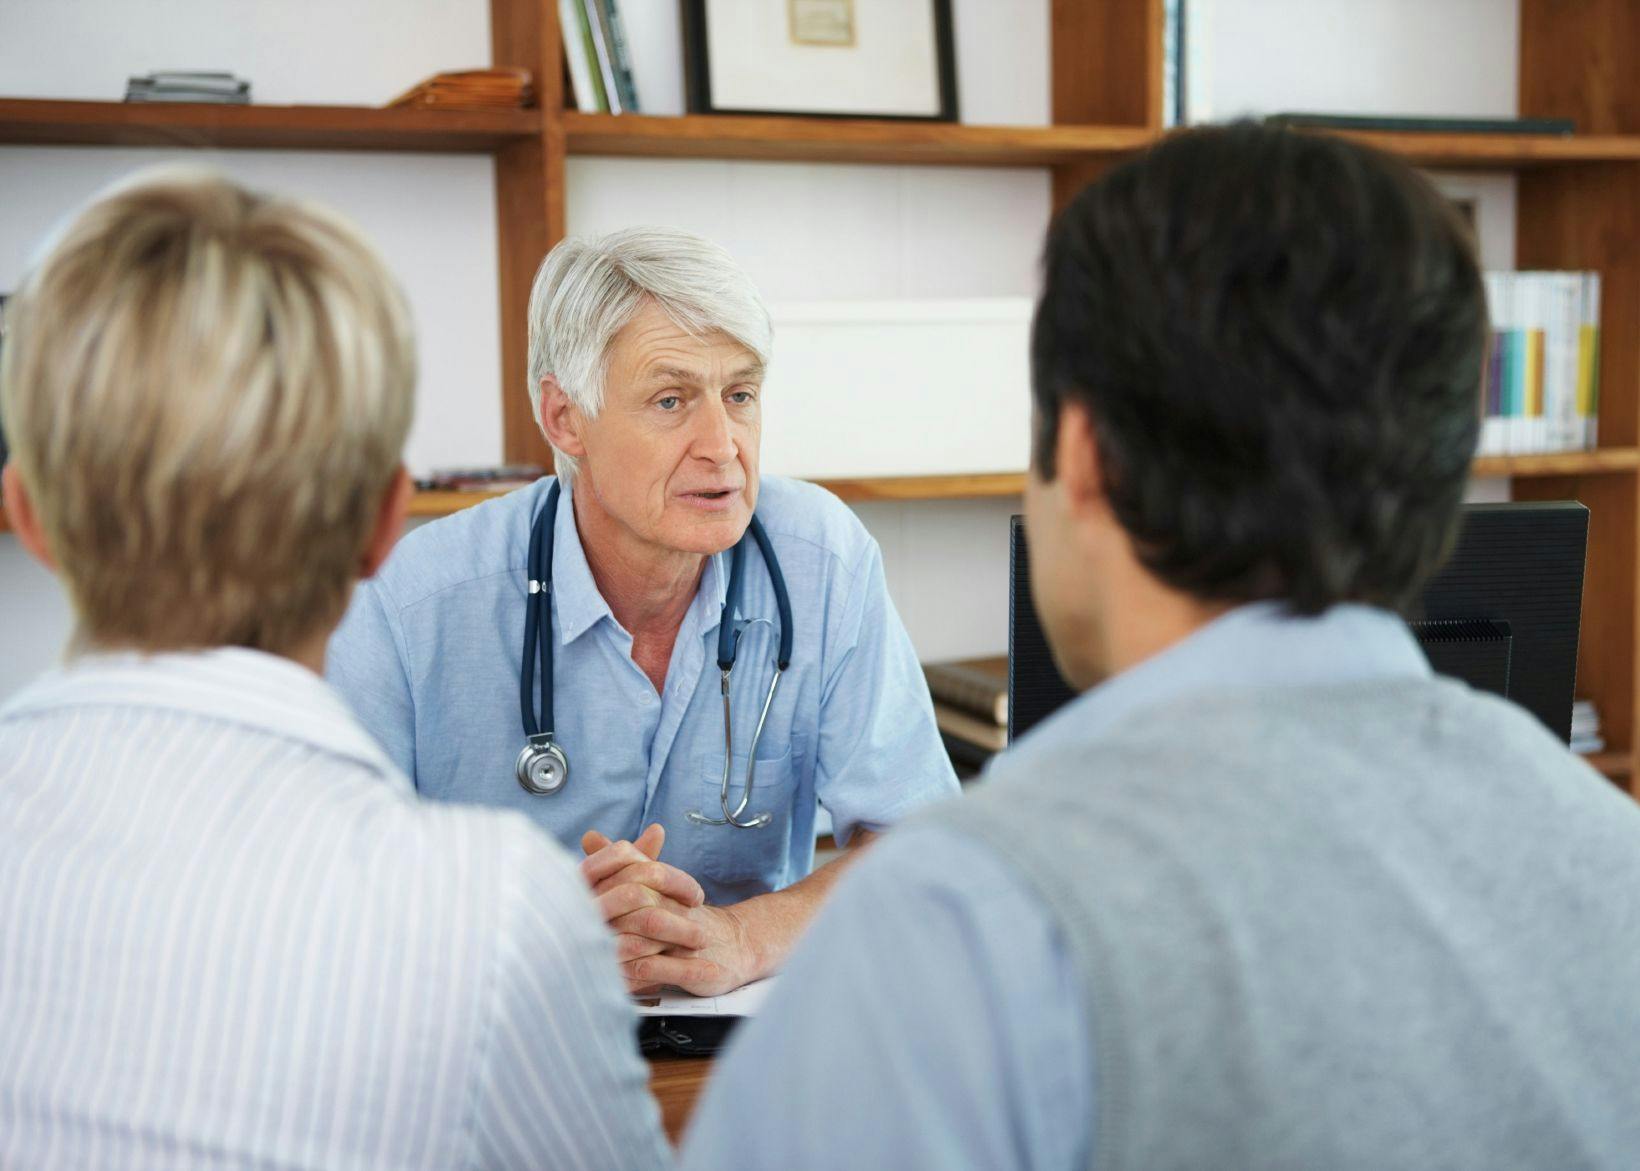 A doctor with gray hair and a blue shirt talking with patients. Opdivo and chemotherapy did not improve progression-free survival in some patients with non-small cell lung cancer.